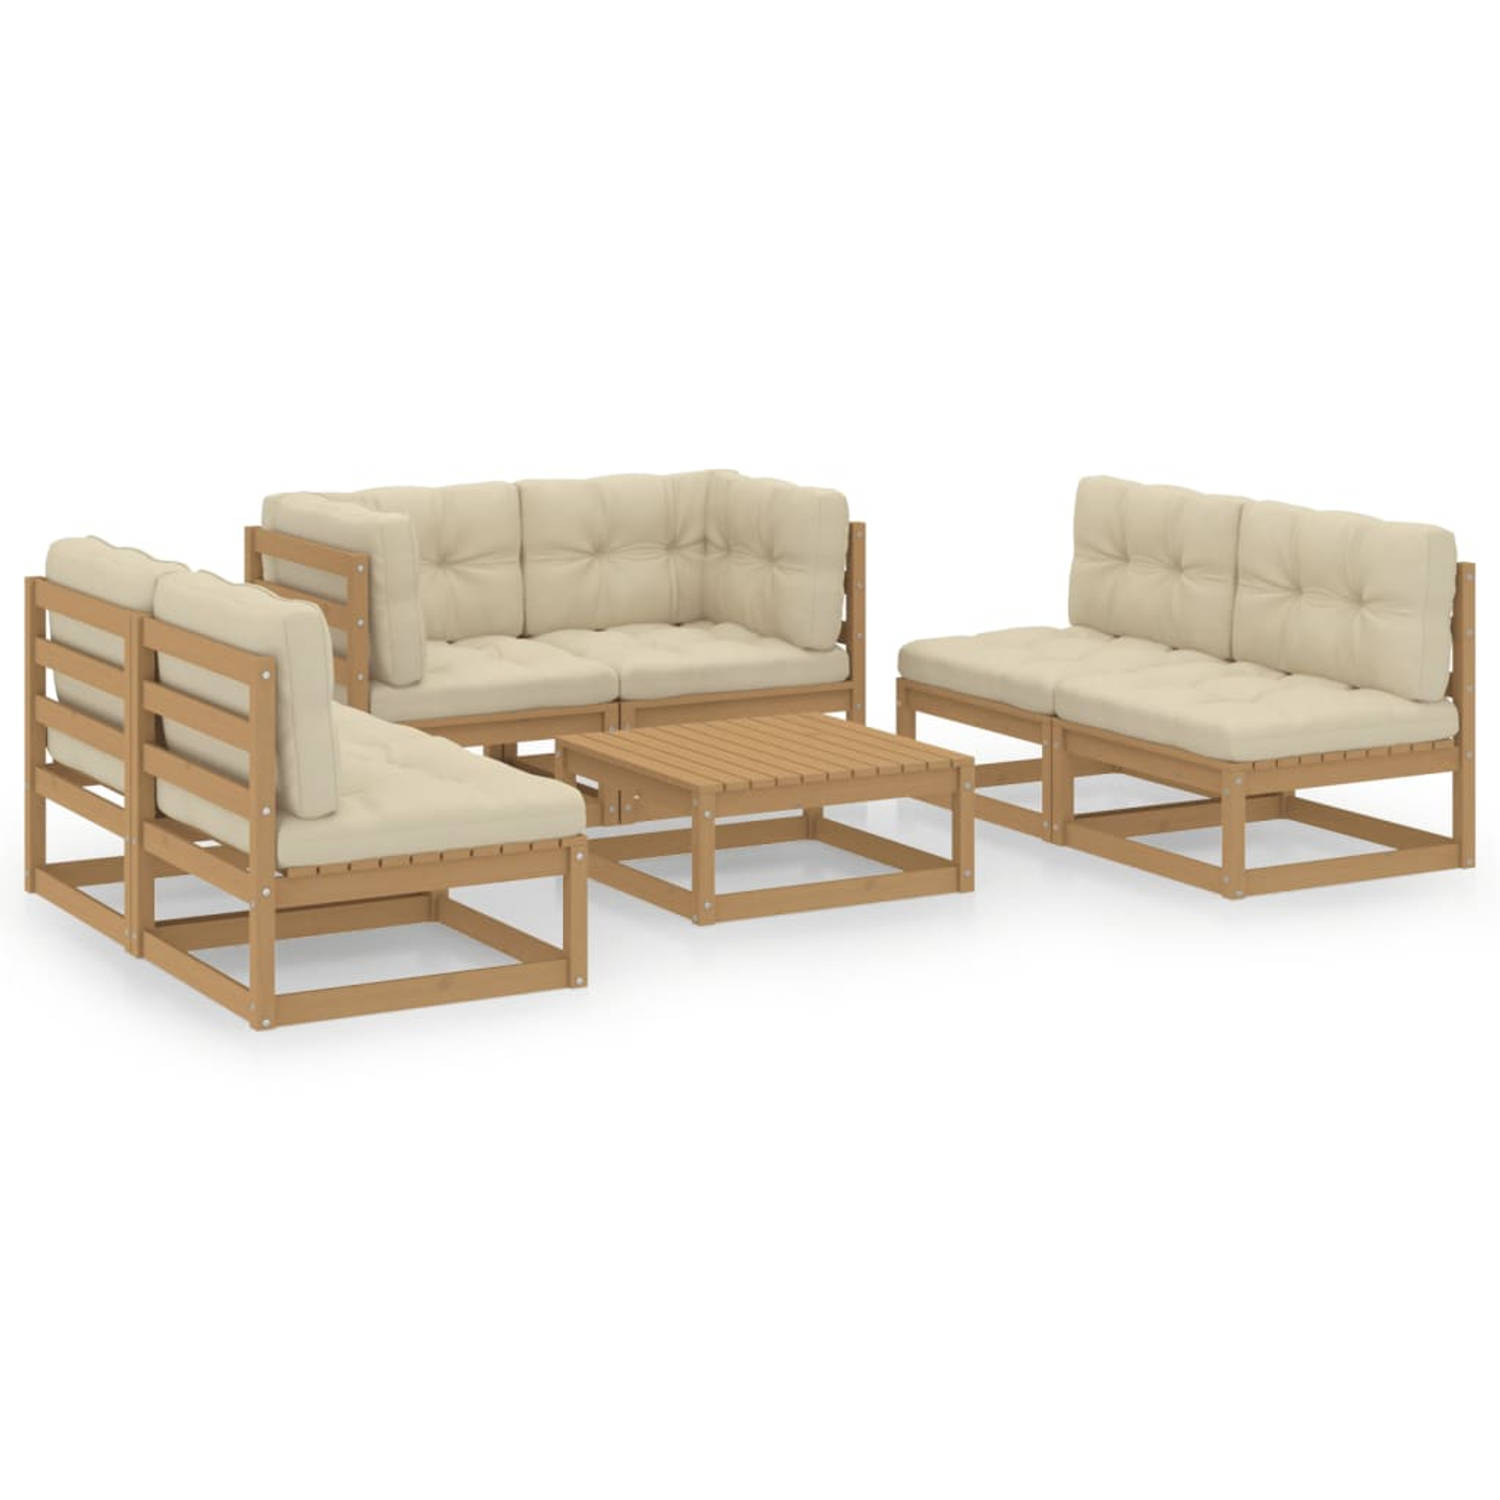 The Living Store Tuinset Grenenhout - Lounge - 70x70x67 cm - Honingbruin  Crèmekleurig